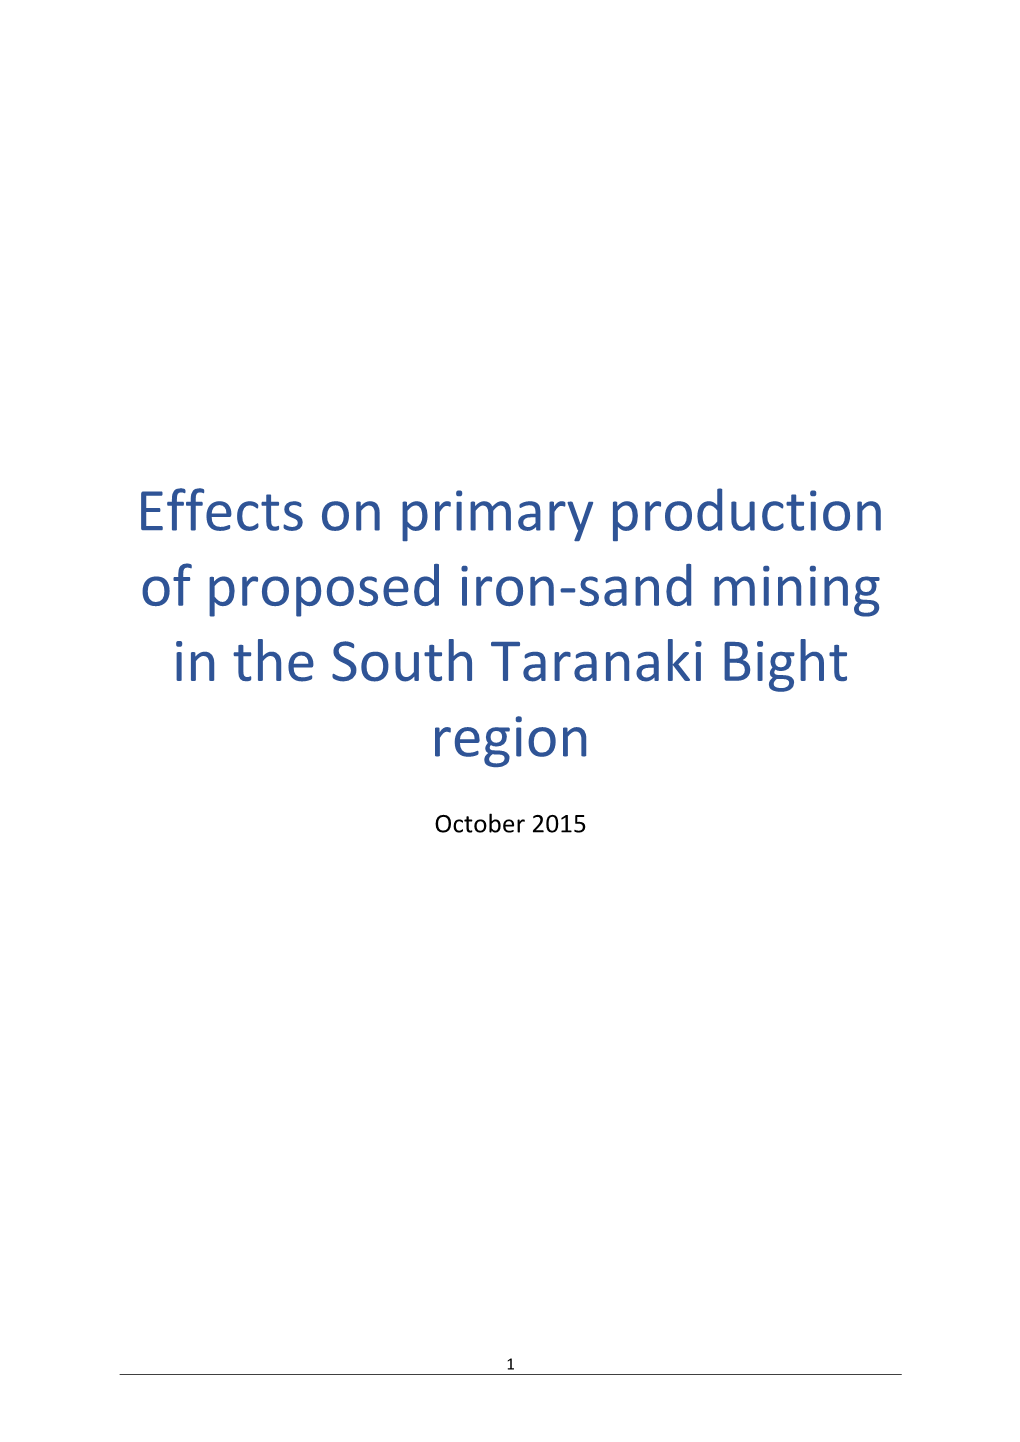 Effects on Primary Production of Proposed Iron-Sand Mining in the South Taranaki Bight